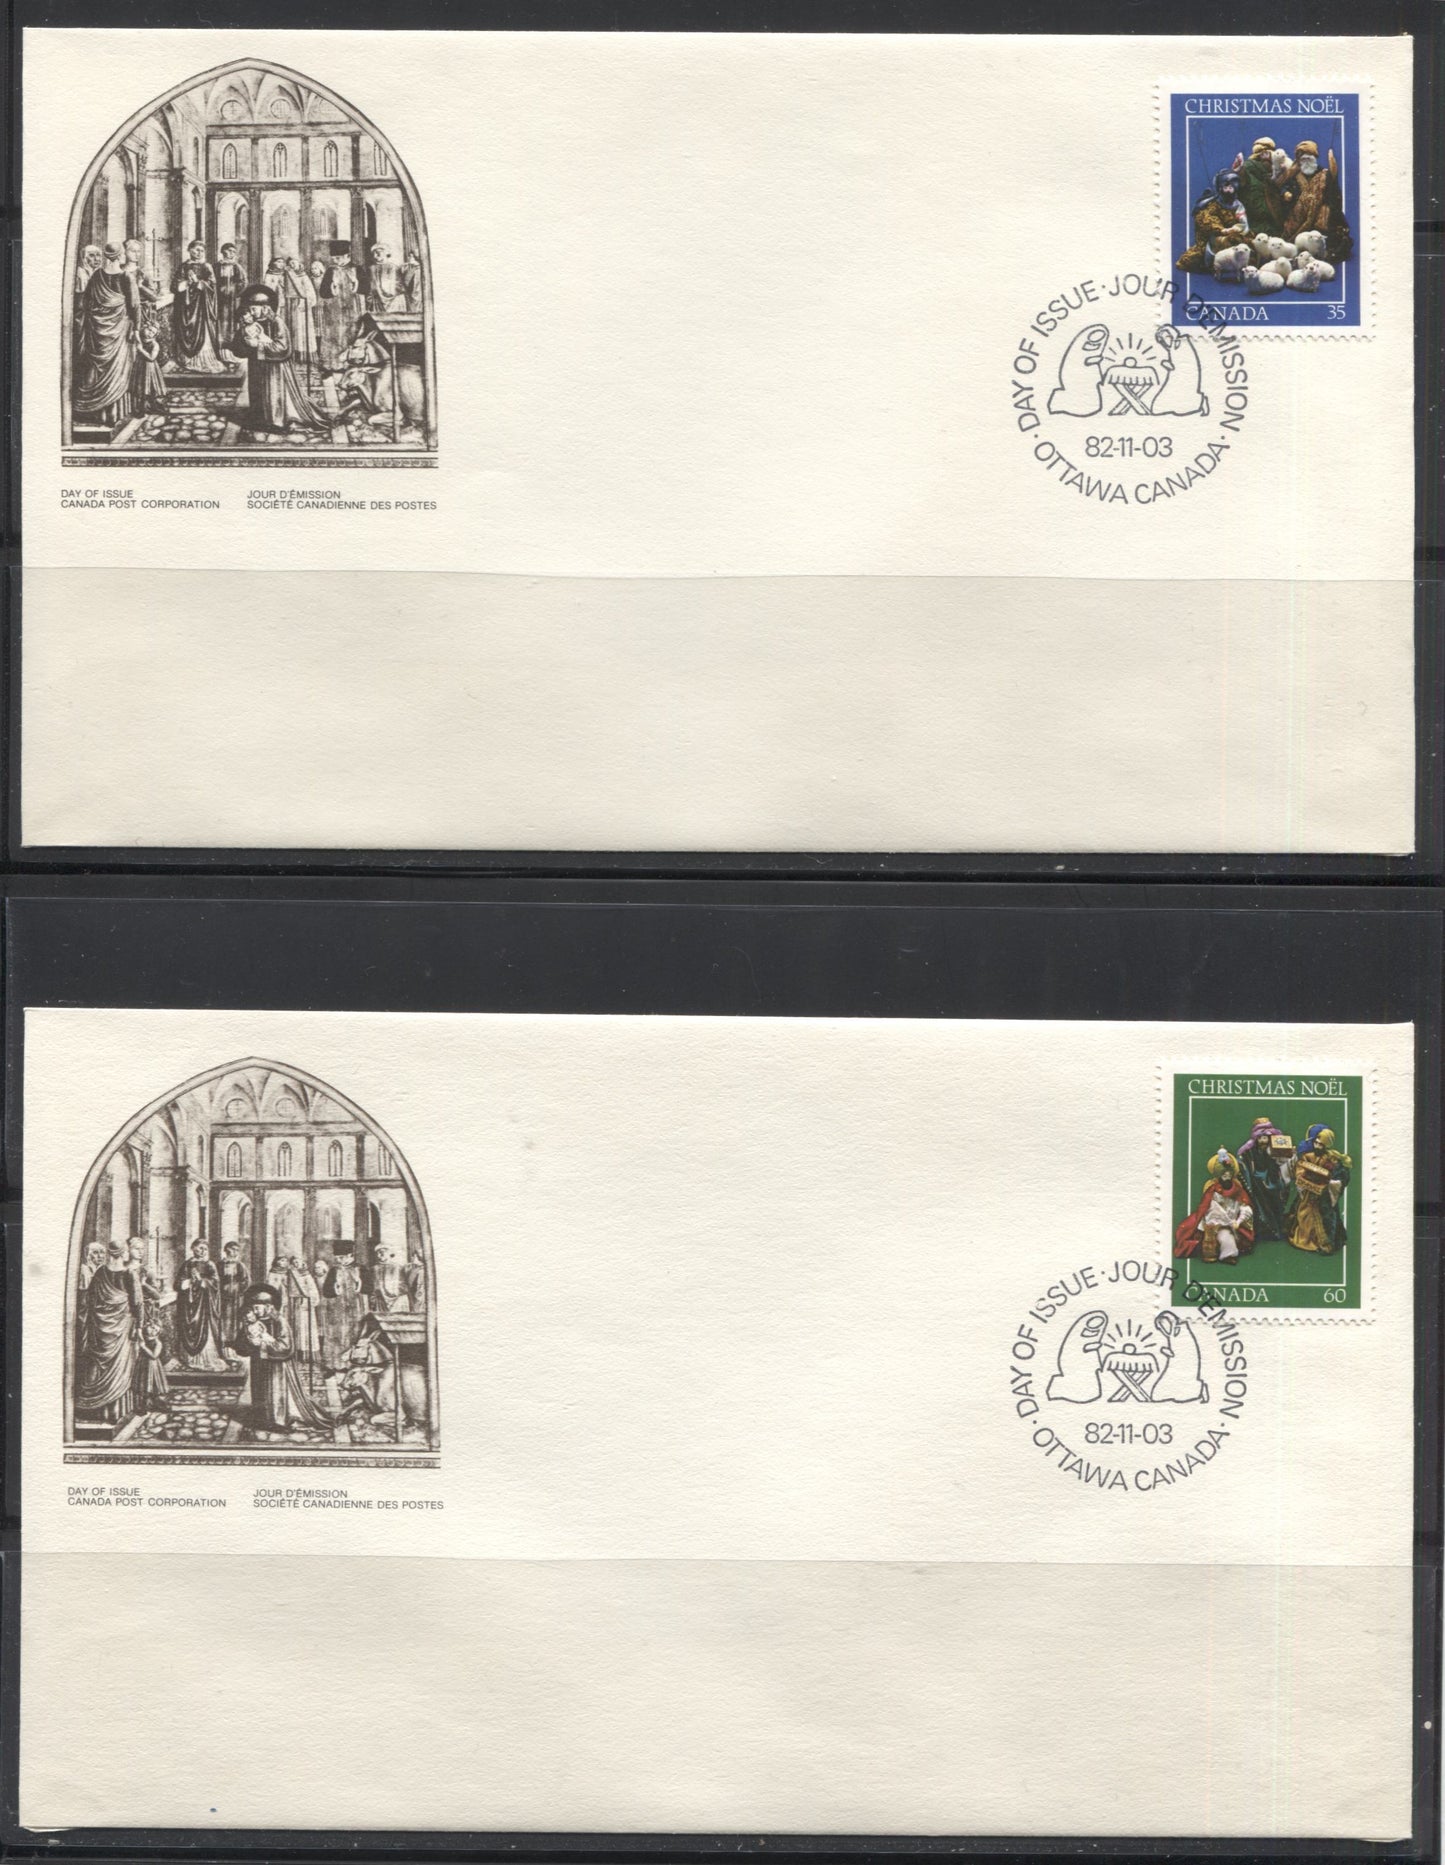 Lot 193 Canada #900/2239 1981-2007 Christmas, A Complete Set of Canada Post Official FDC's for 1981-1982 and 1984-1986 Issues